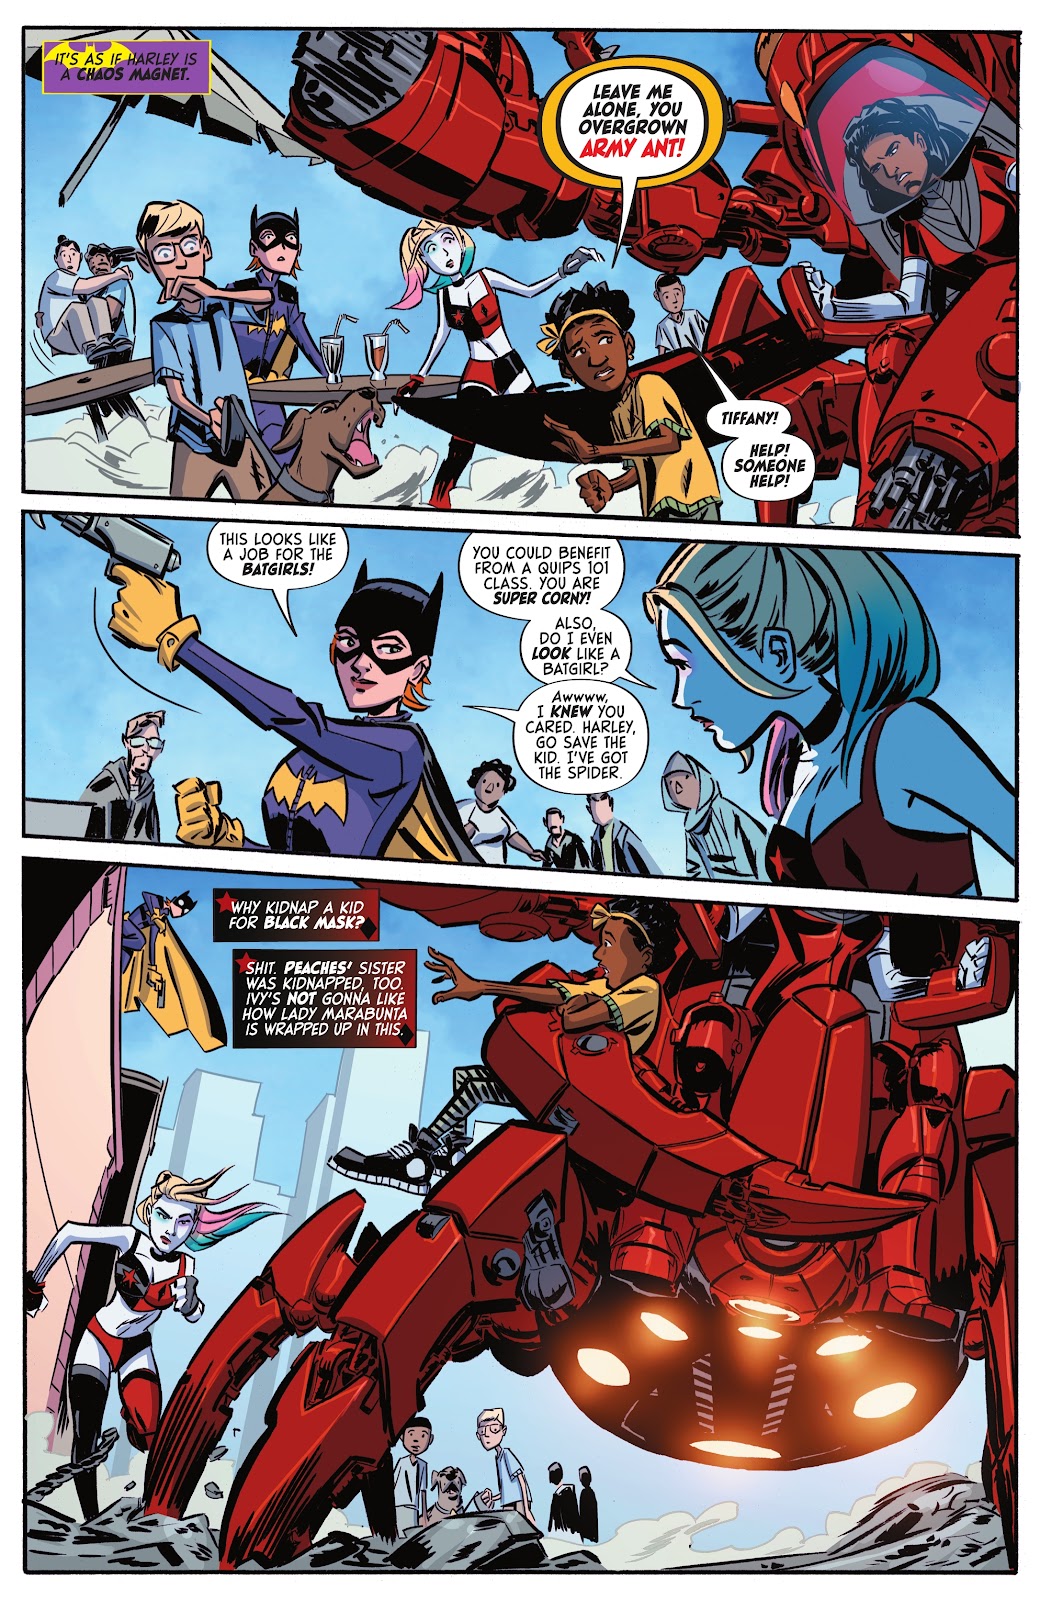 Harley Quinn: The Animated Series: Legion of Bats! issue 4 - Page 11